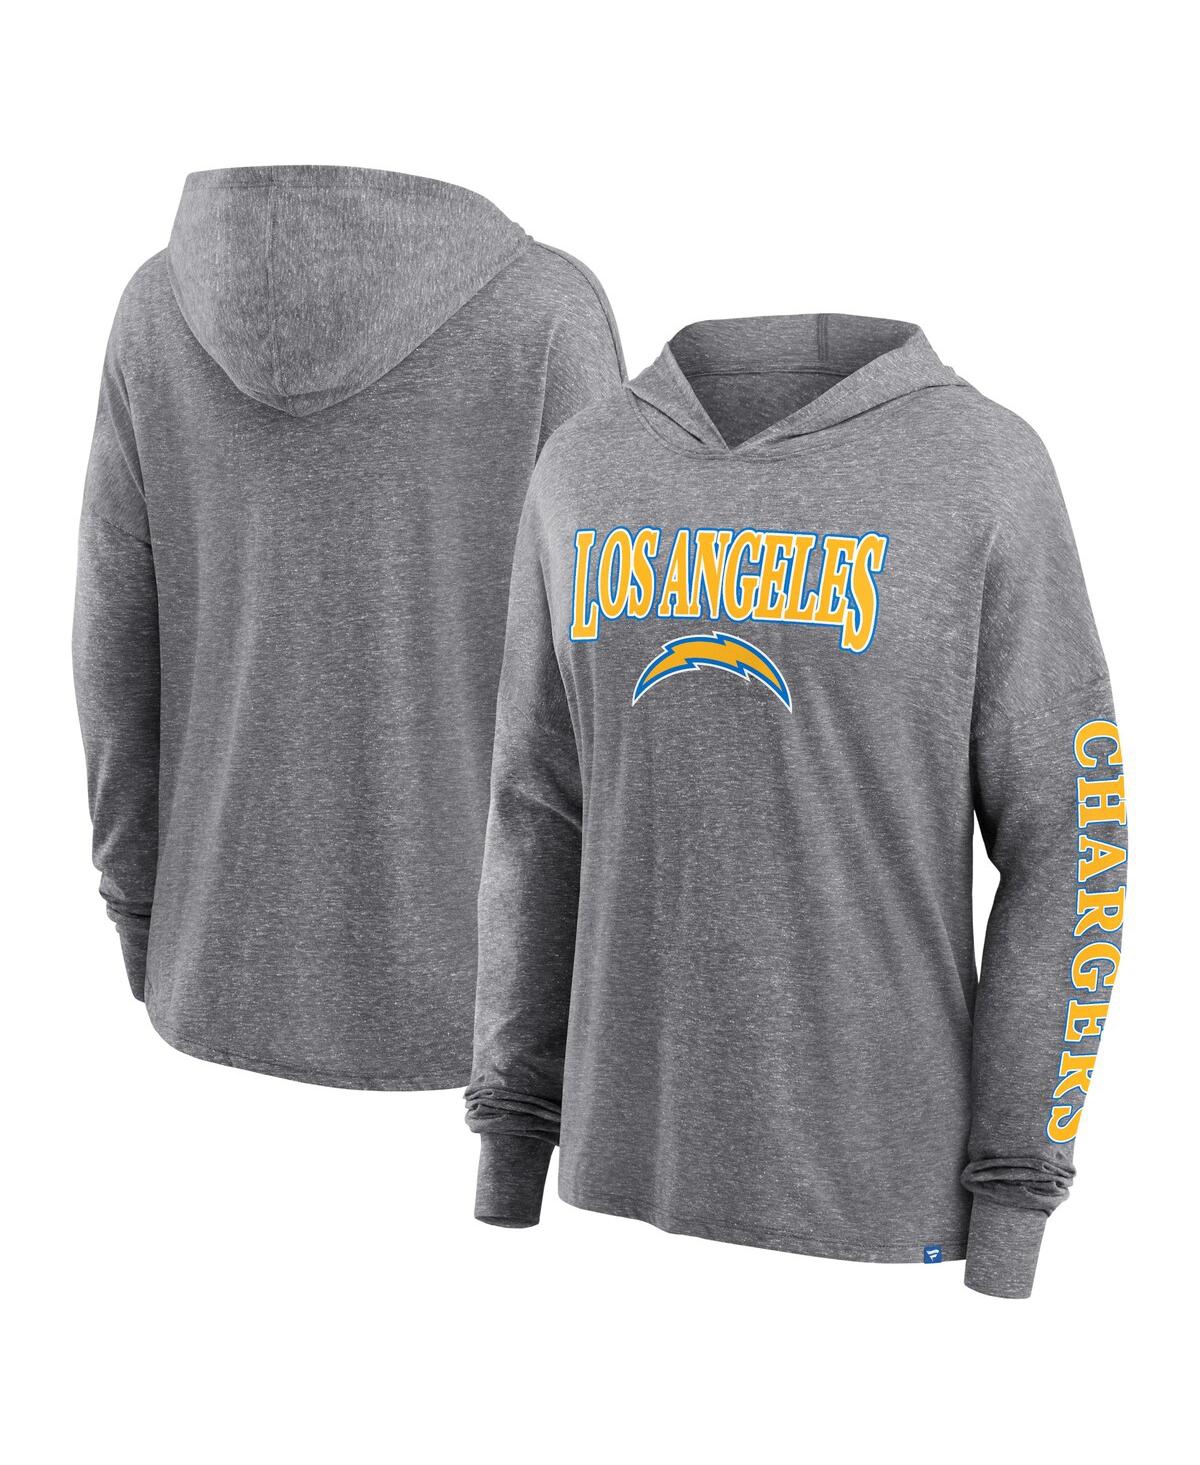 Women's Fanatics Heather Gray Los Angeles Chargers Classic Outline Pullover Hoodie - Heather Gray